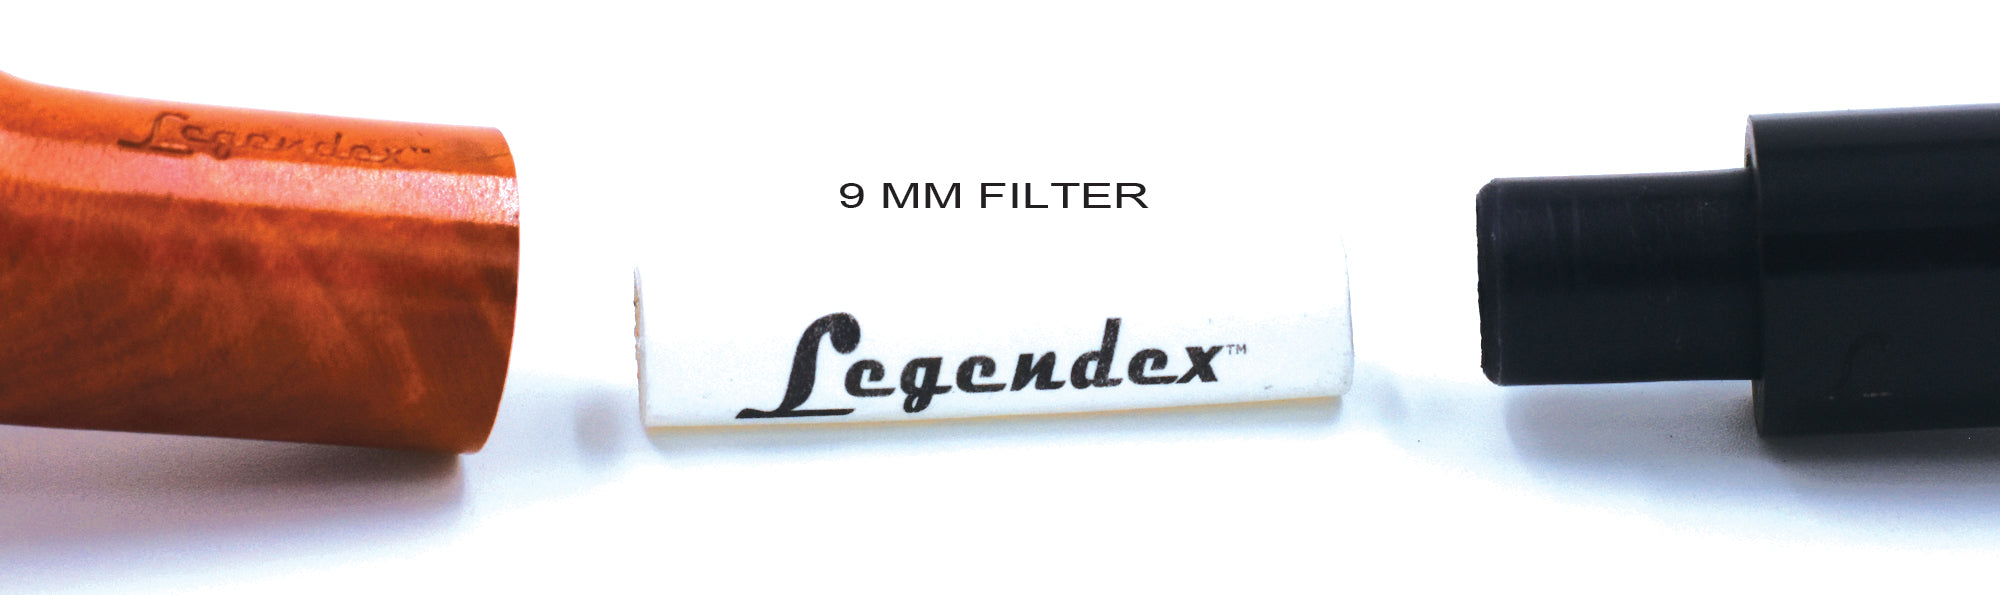 LEGENDEX® LASCALA* Plexiglass Mouthpiece 9 MM Filtered Briar Smoking Pipe Made In Italy 01-08-708